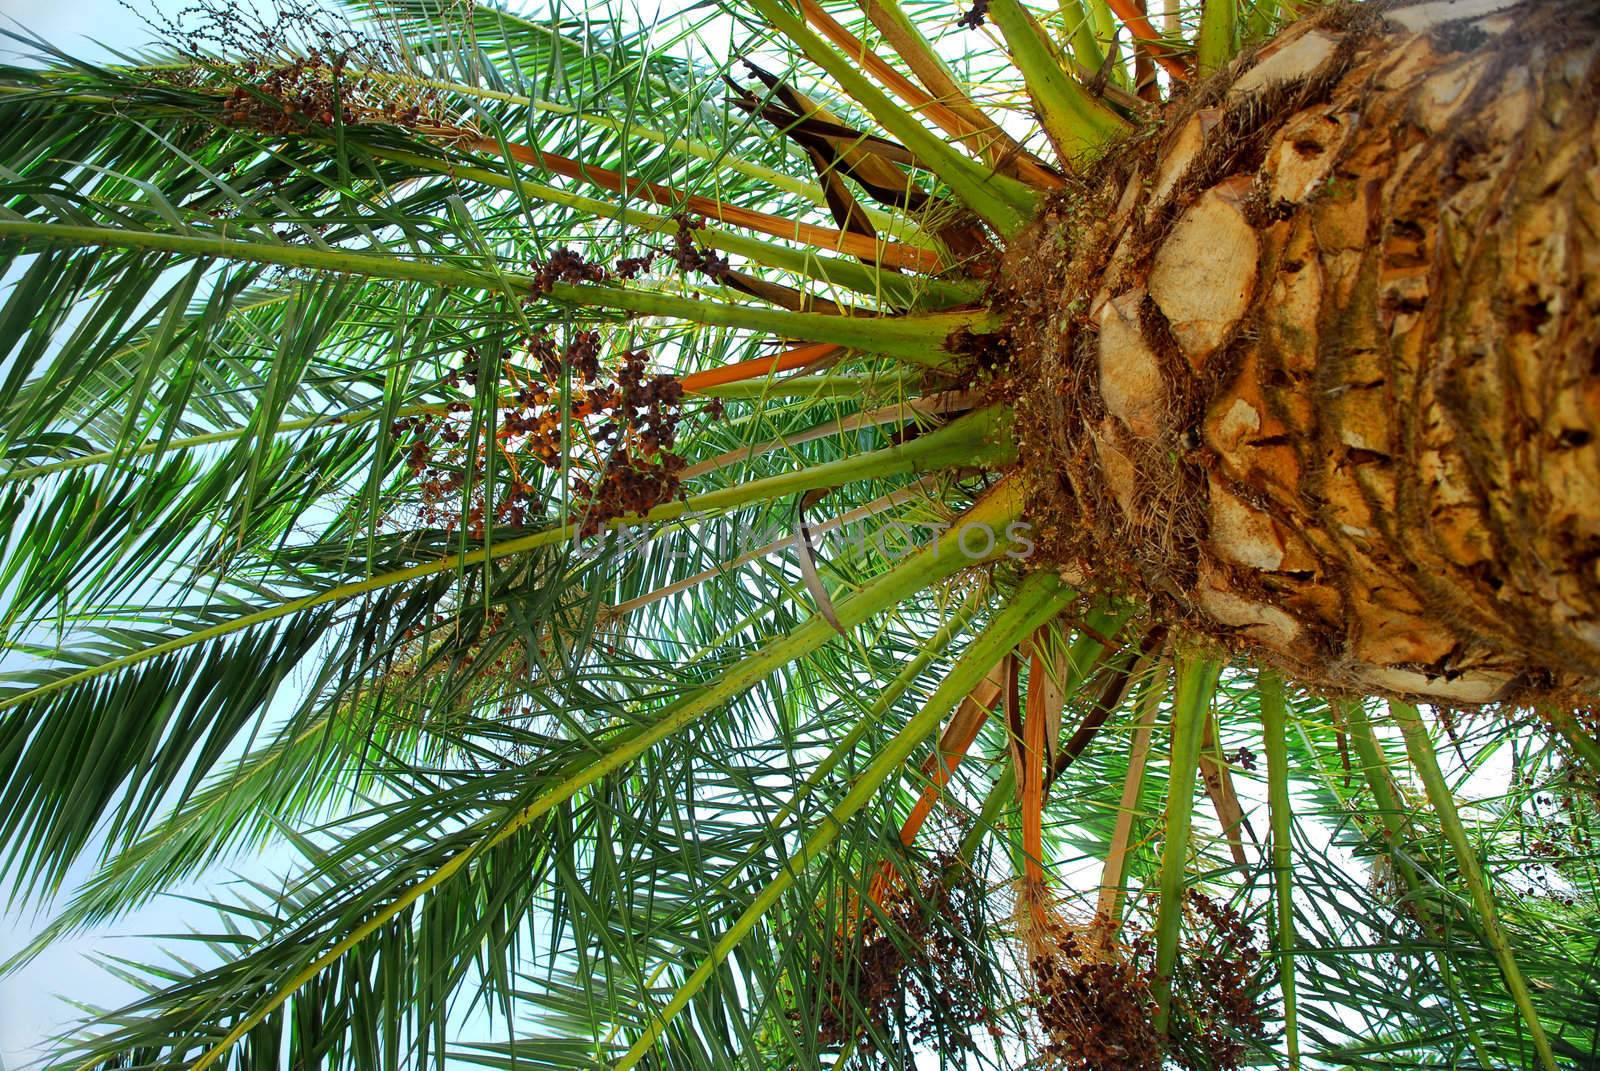 Canopy of a young date palm tree